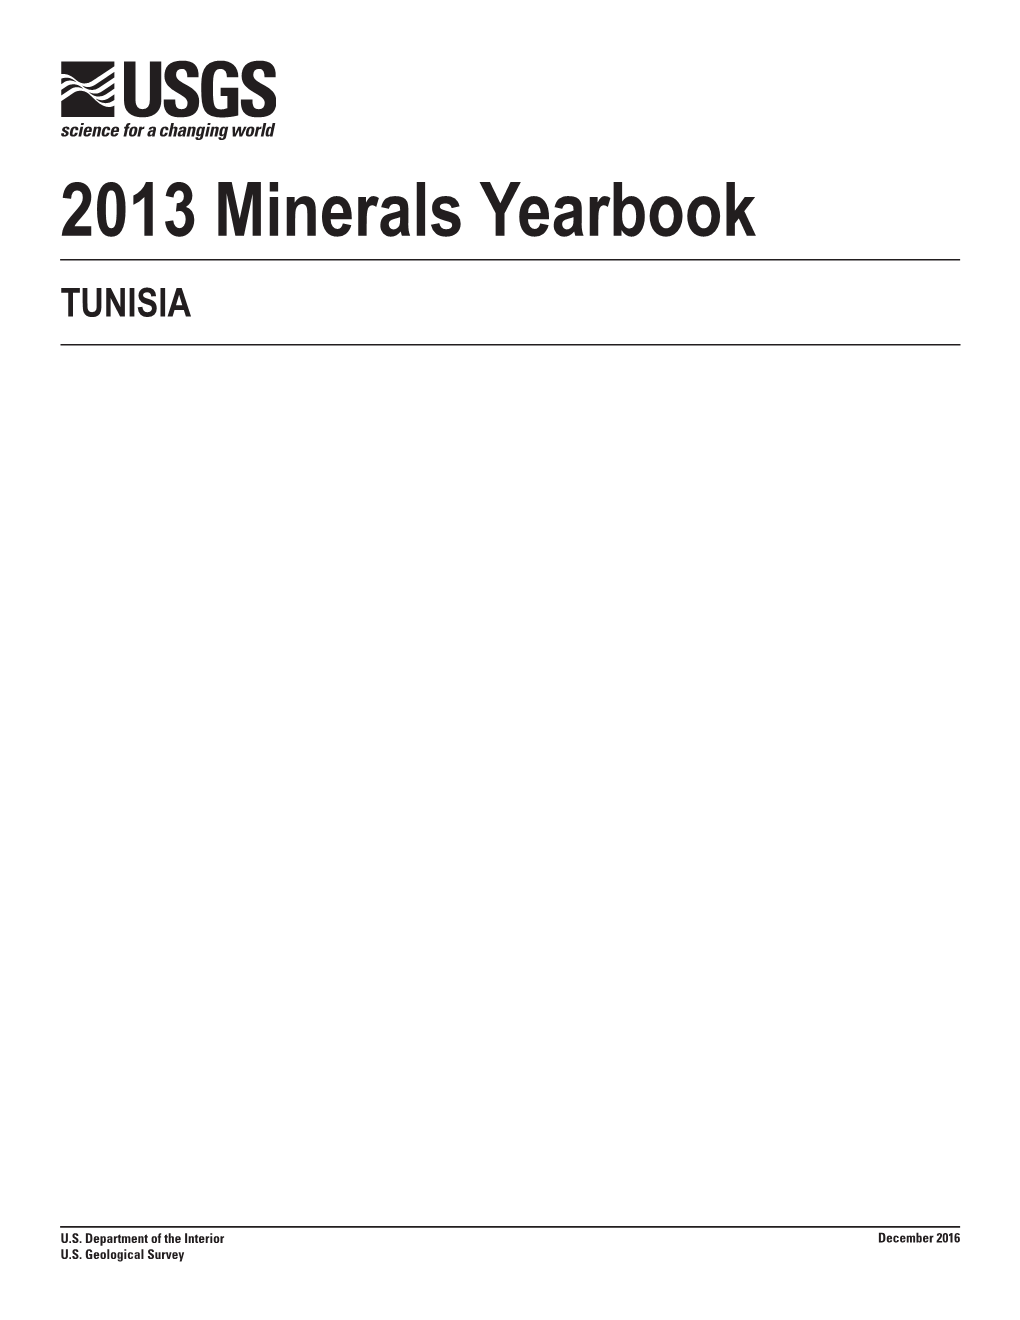 The Mineral Industry of Tunisia in 2013